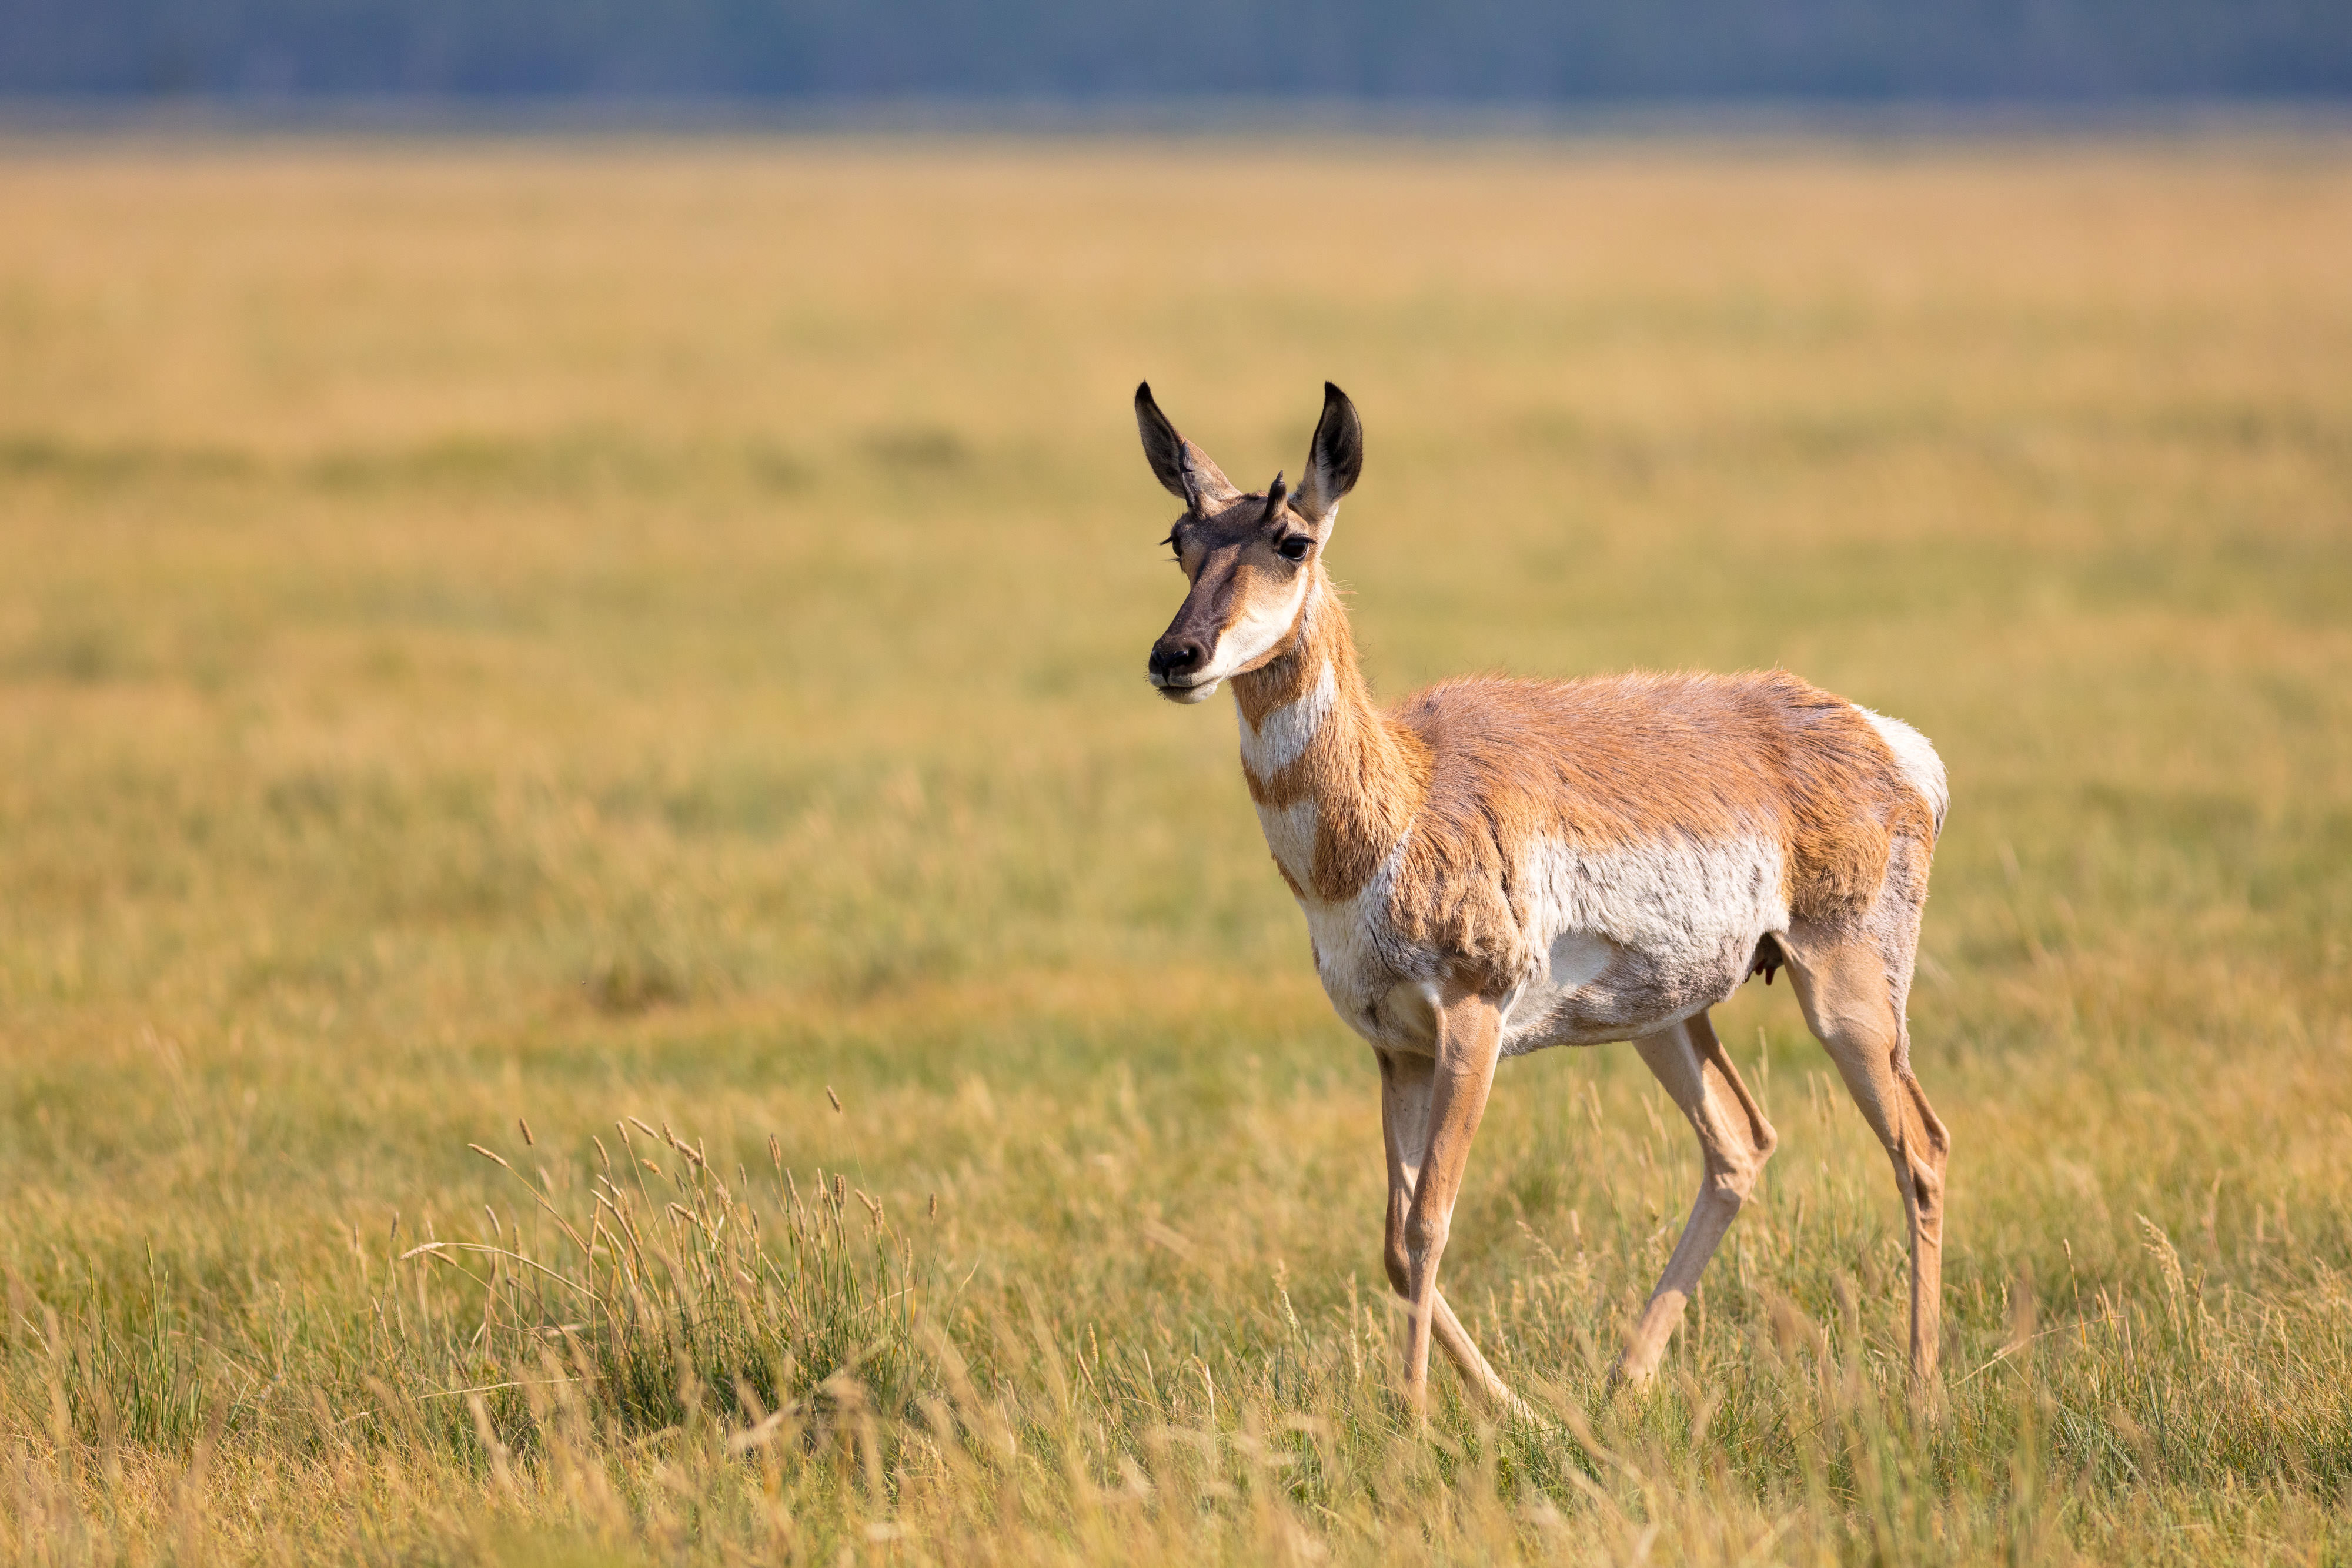 Female pronghorn with green field in the distance.